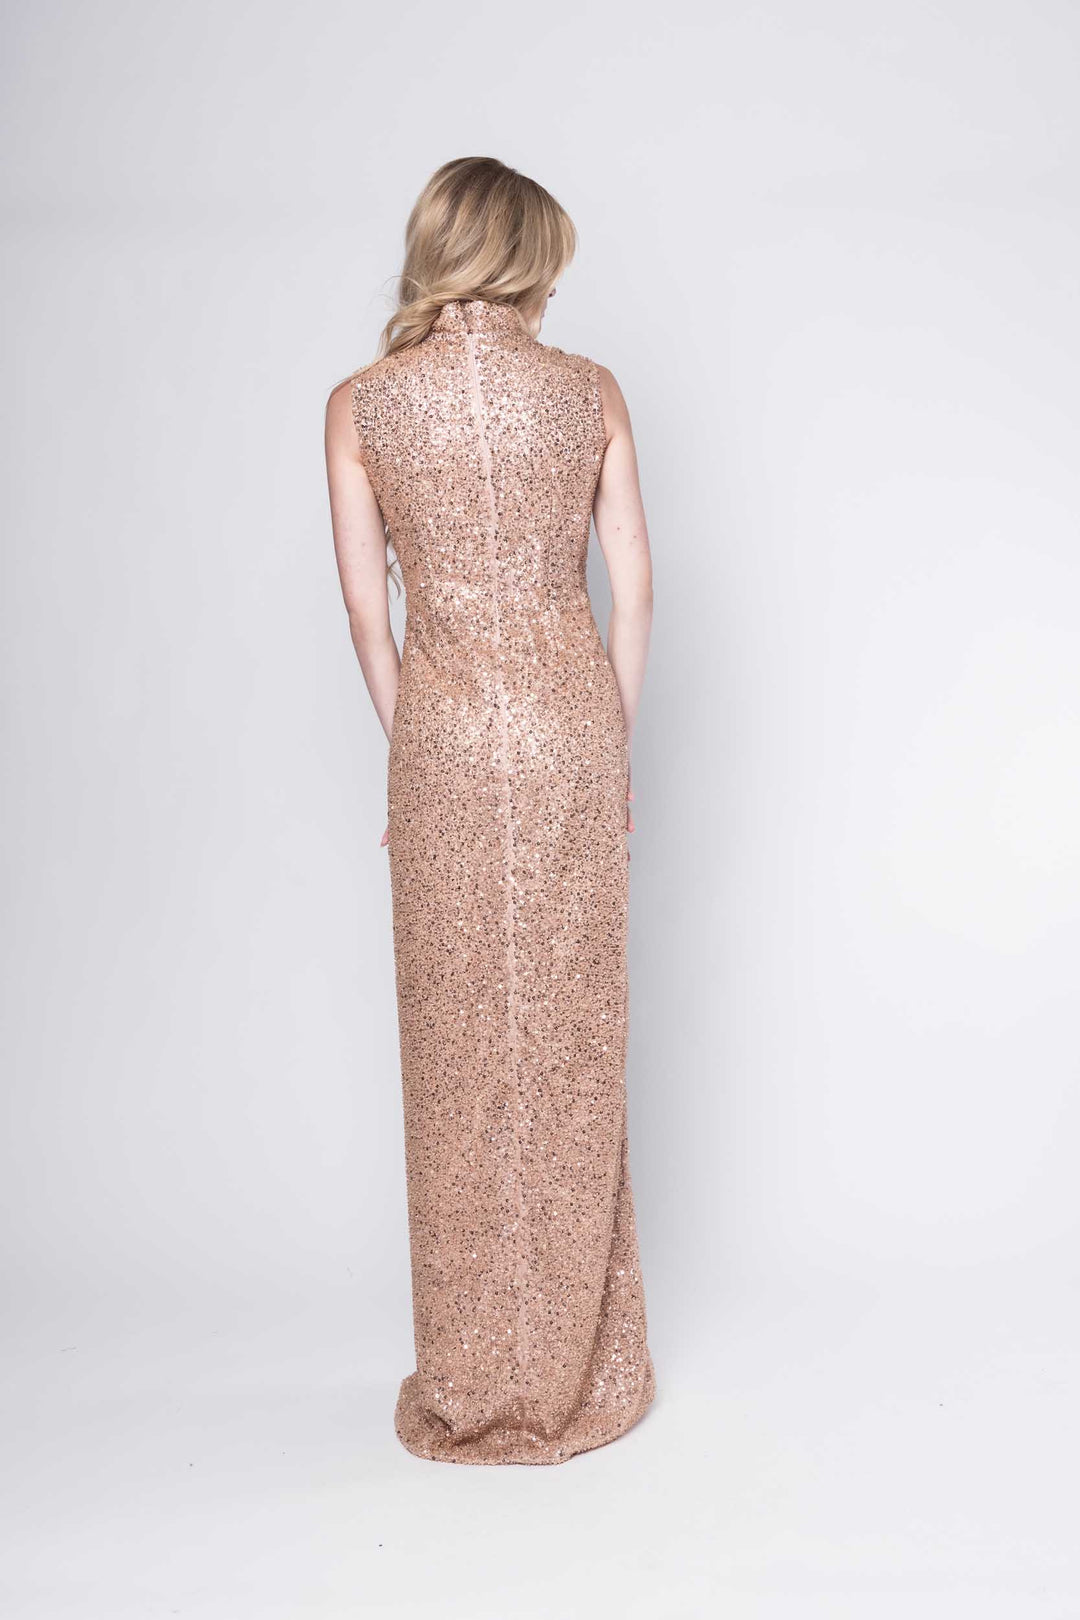 Beautiful model in a sequined rose gold floor-length Sujata Gazder gown - back view